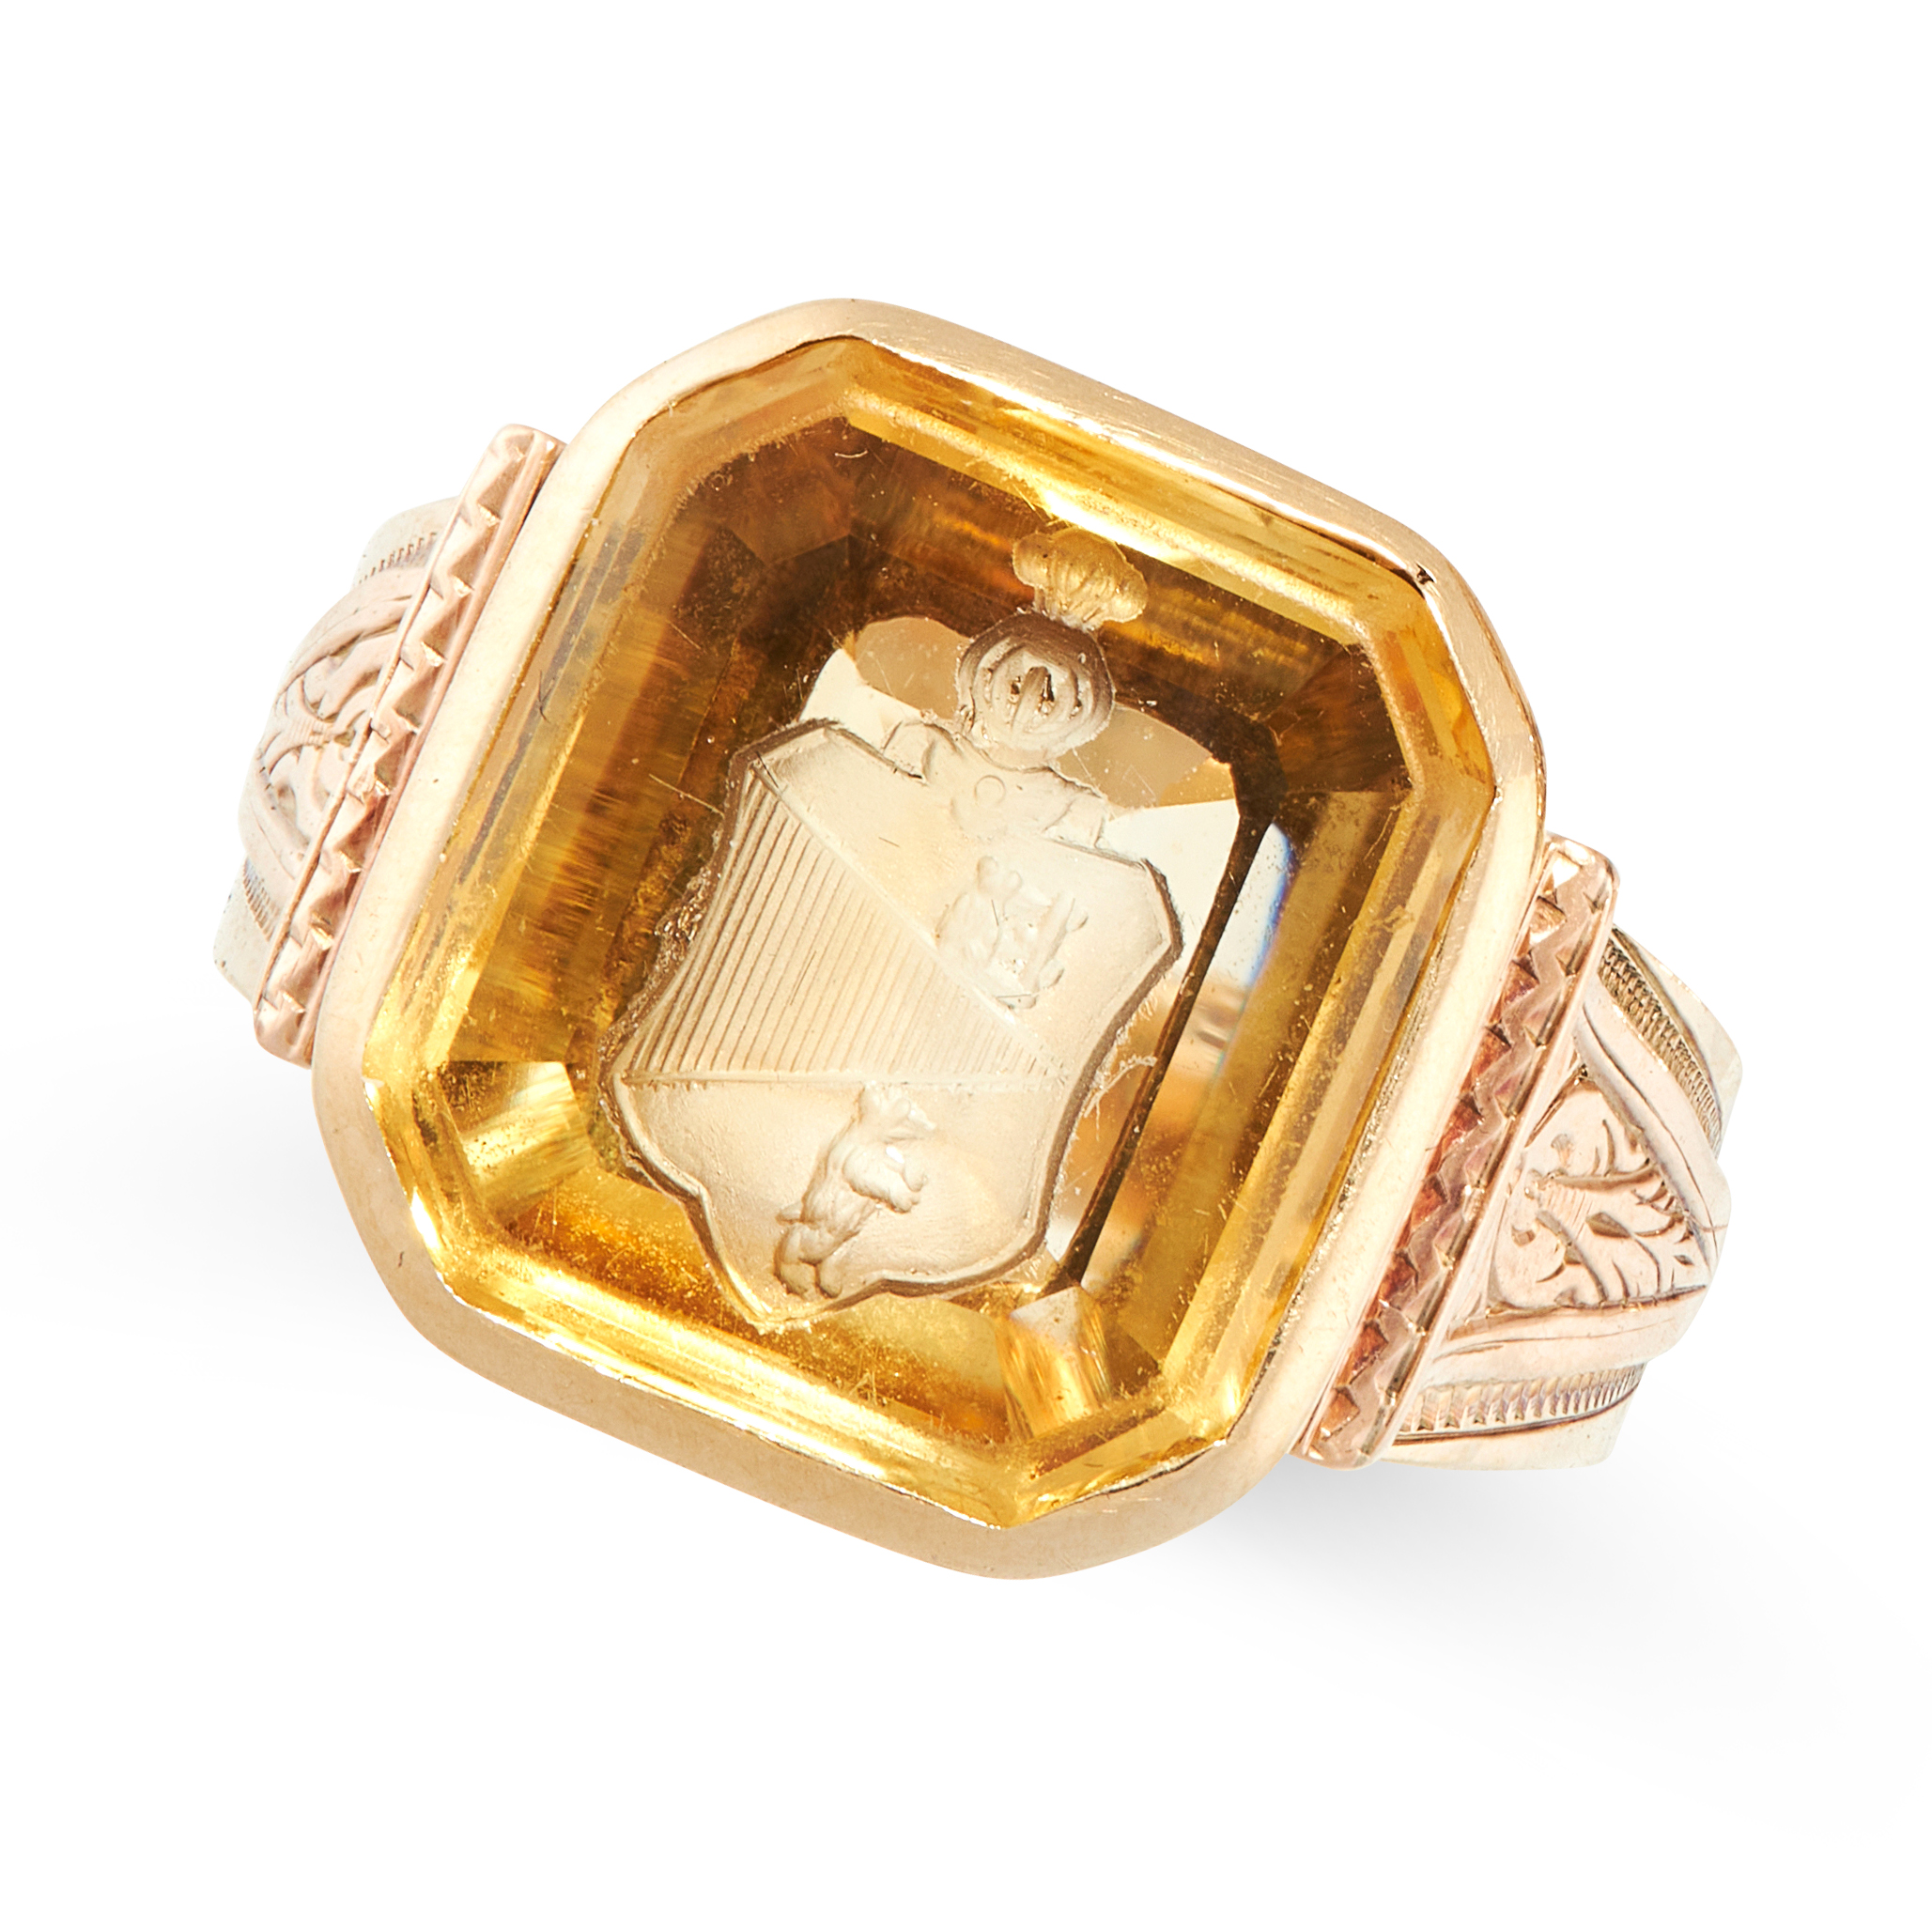 AN ANTIQUE CITRINE INTAGLIO SEAL RING in yellow gold, set with an emerald cut citrine, the face